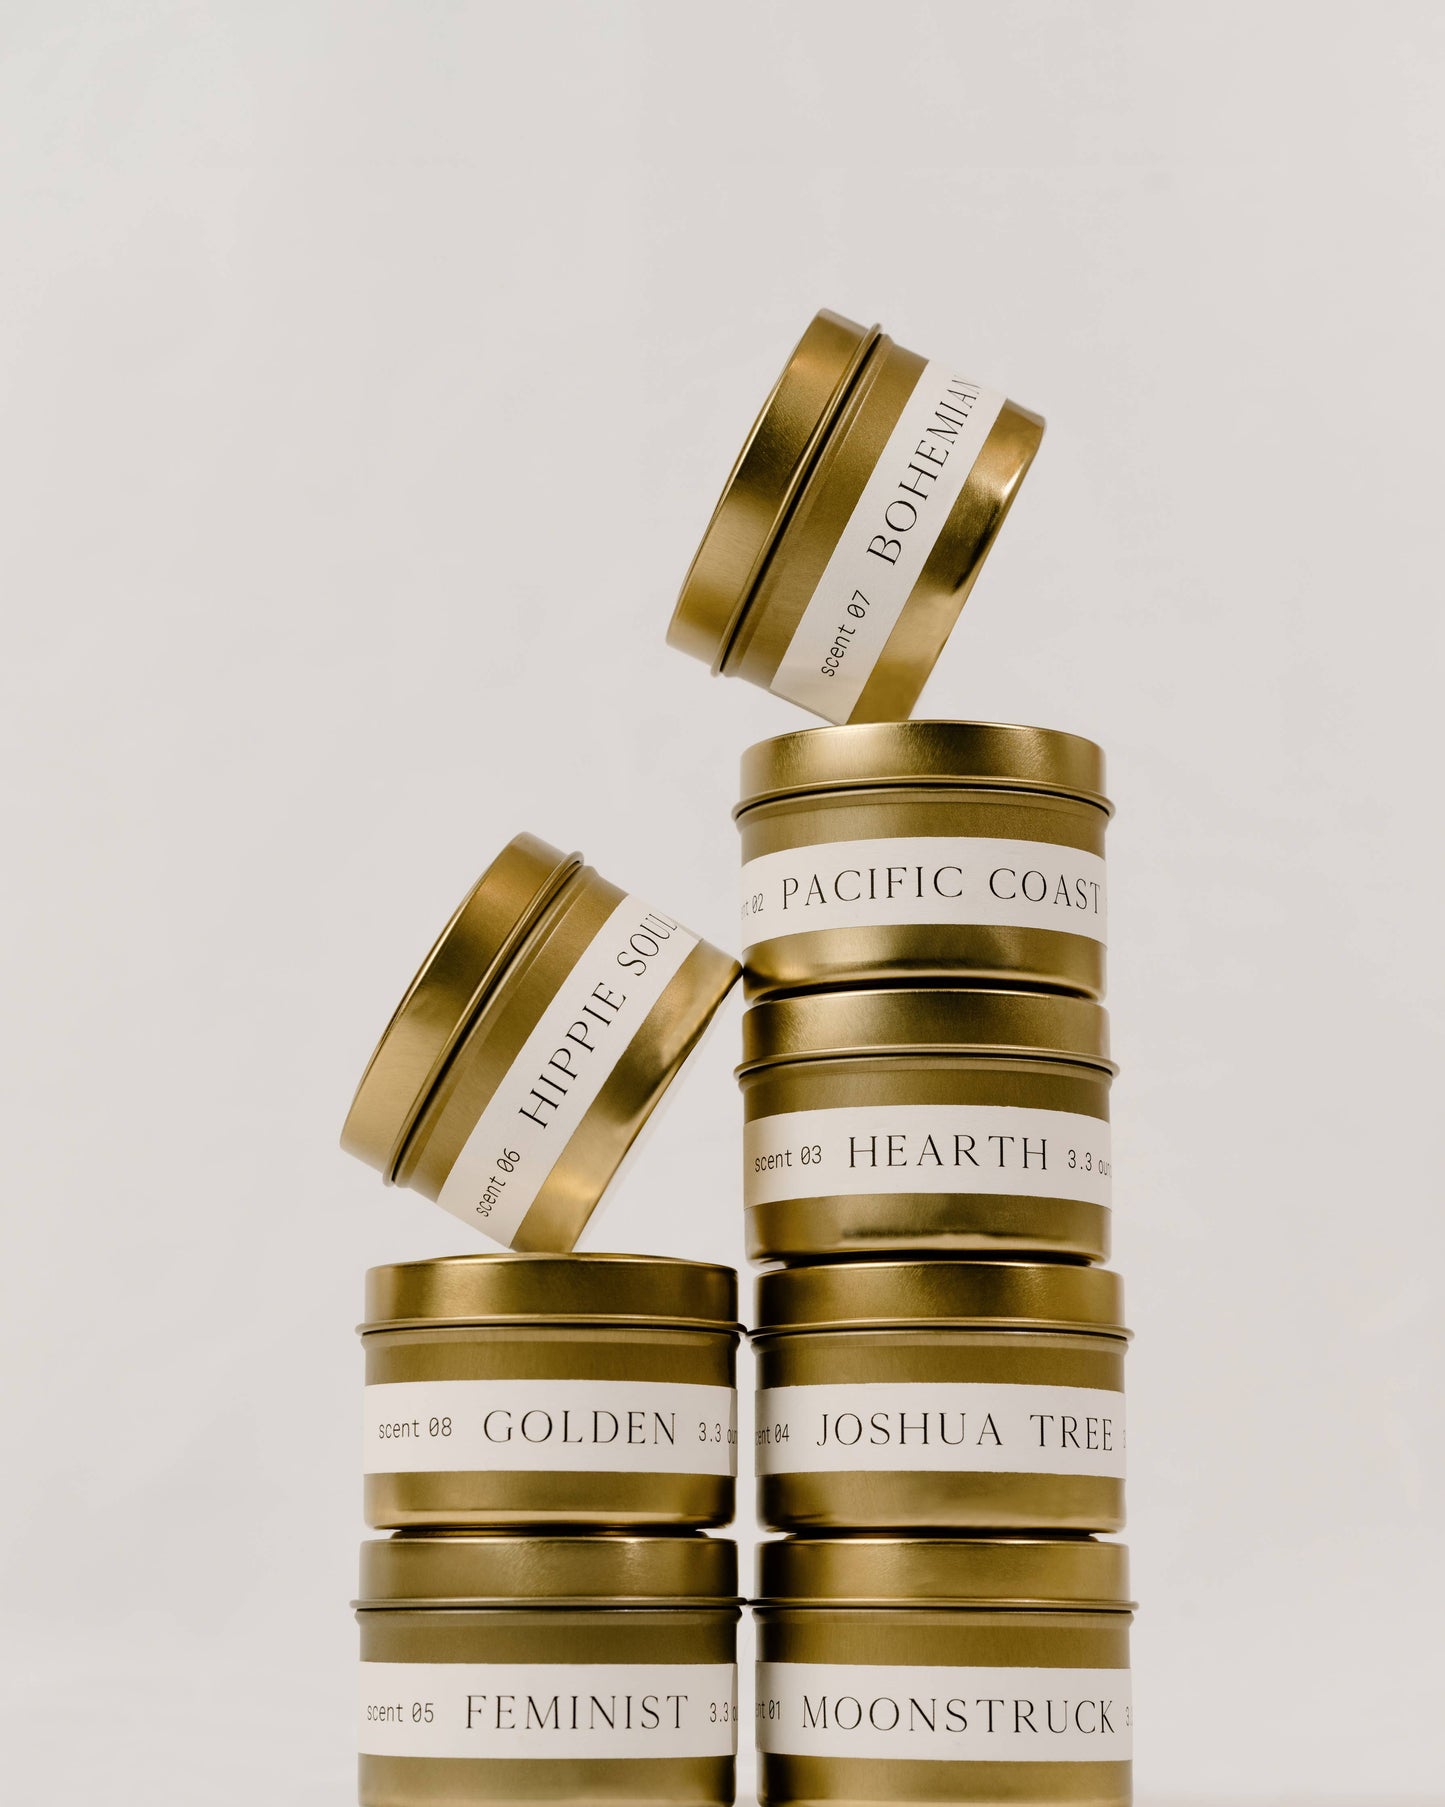 Stacked Layered Candle Tins | Eco-Friendly Clean Fragrance | Wellaine